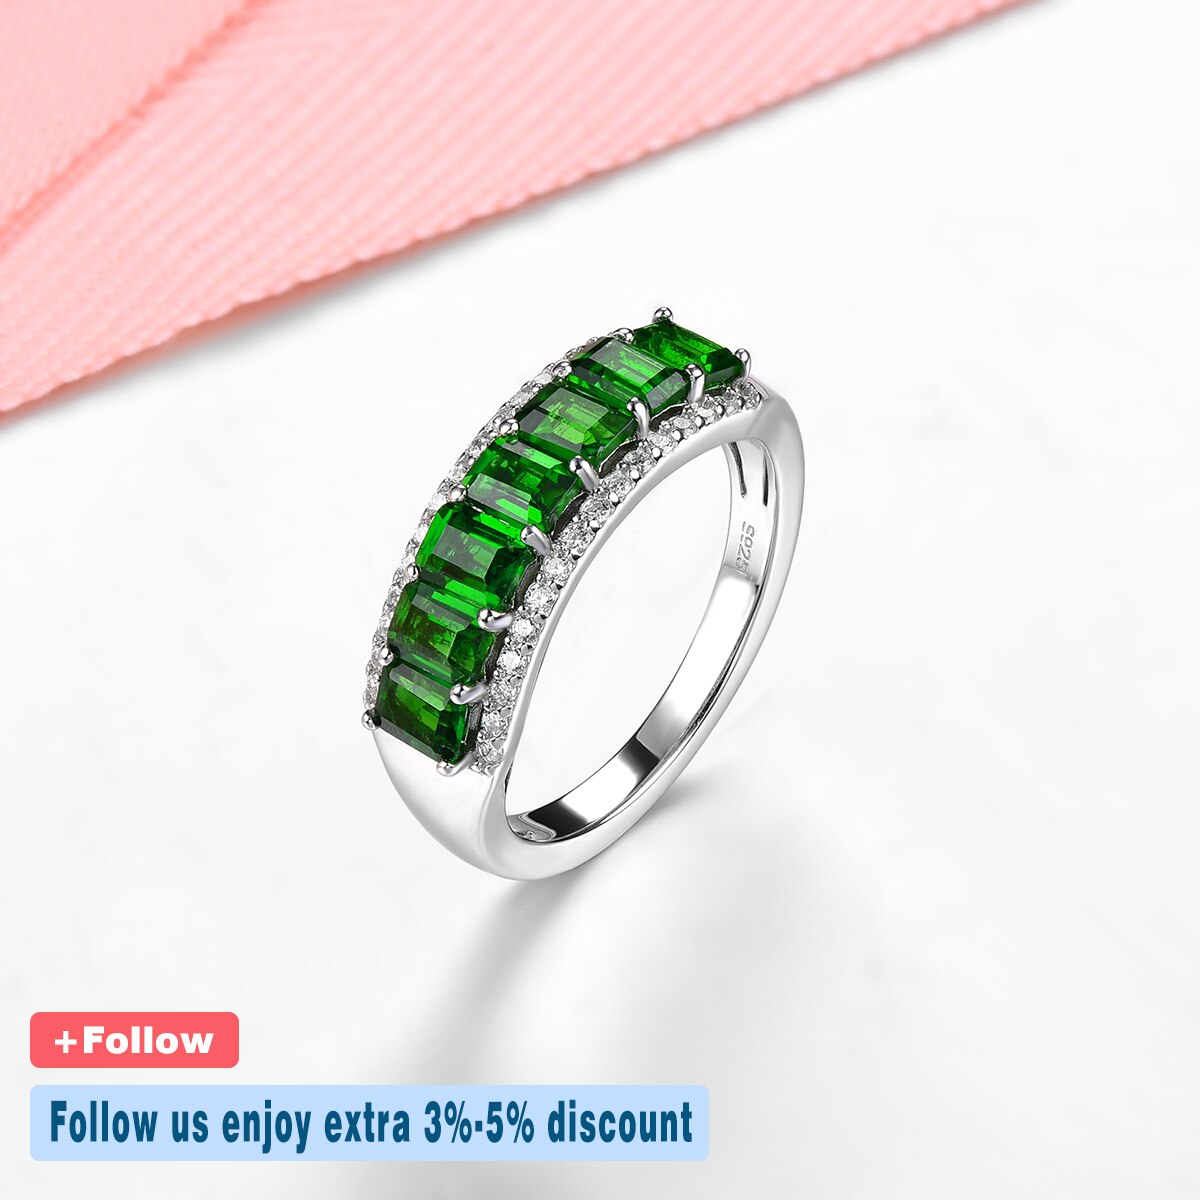 Natural Chrome Diopside Sterling Silver Rings 1.6 Carats Vivid Green Gemstone Women Elegant Style New Year Gifts Top Quality